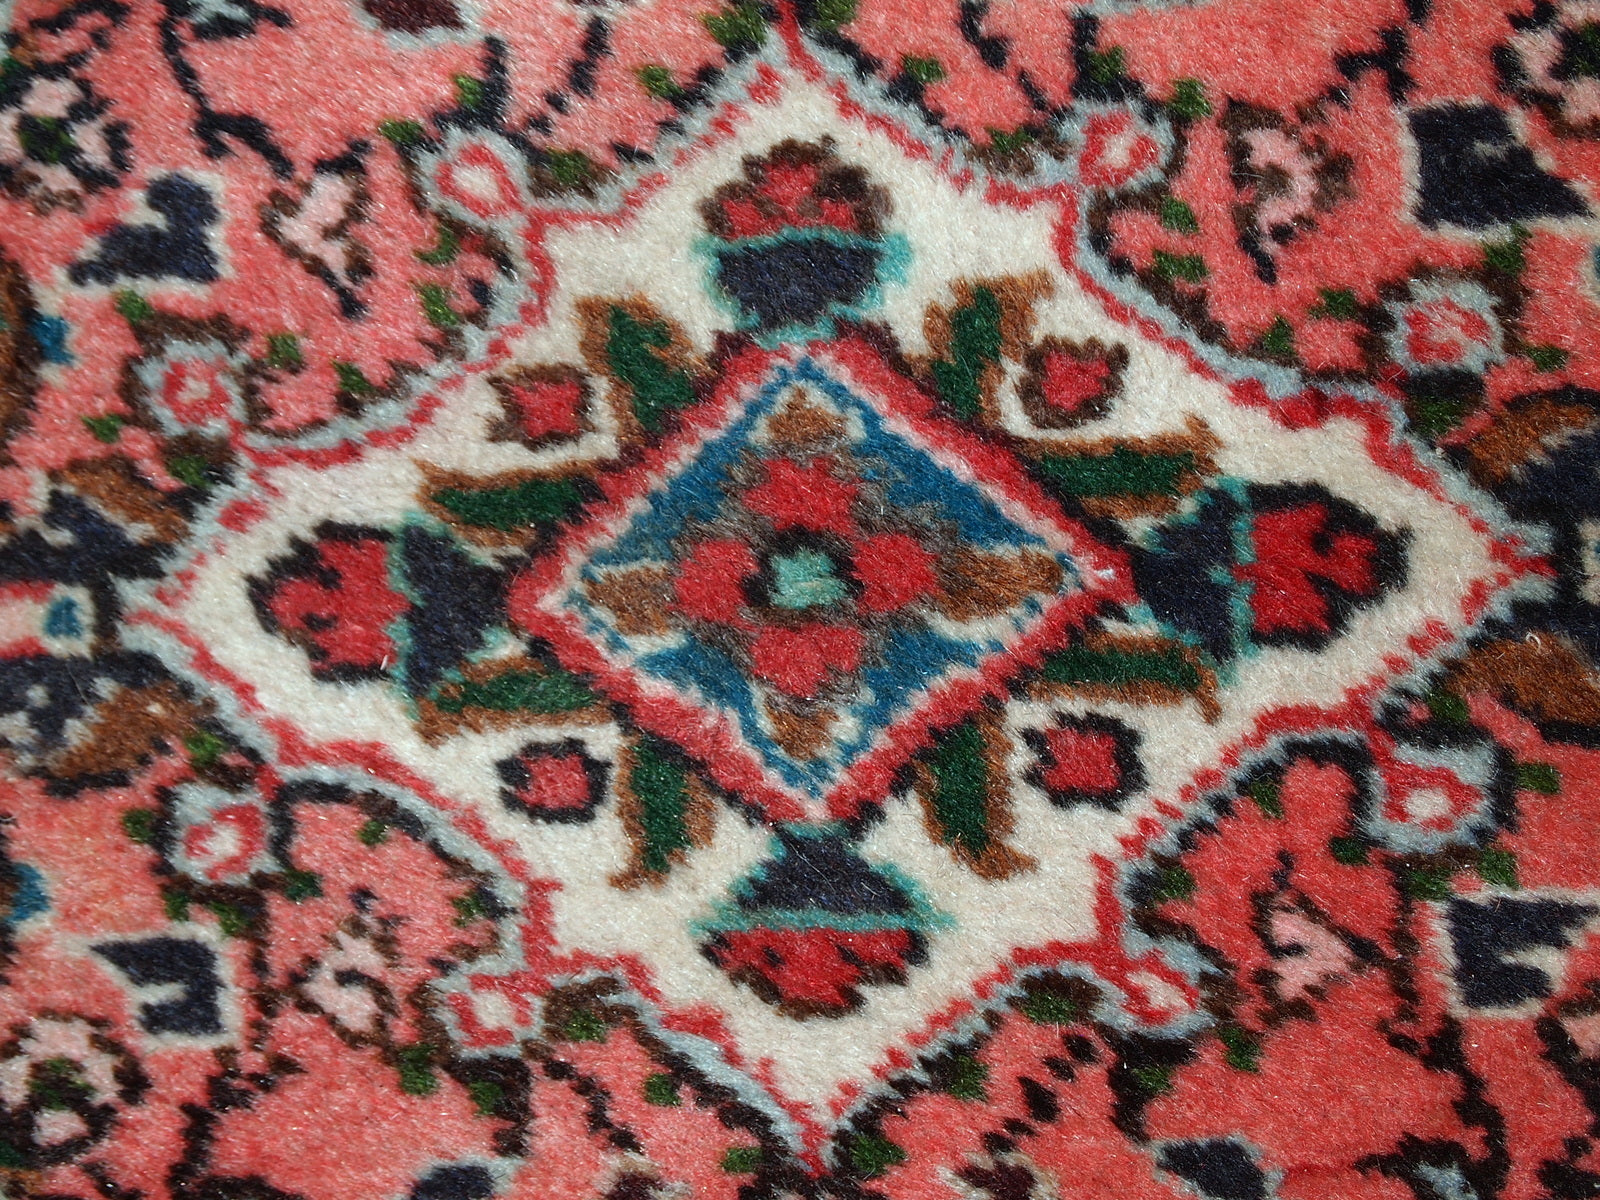 Handmade vintage Lilihan rug in pink wool. This rug has been made in the middle of 20th century in Middle East region.